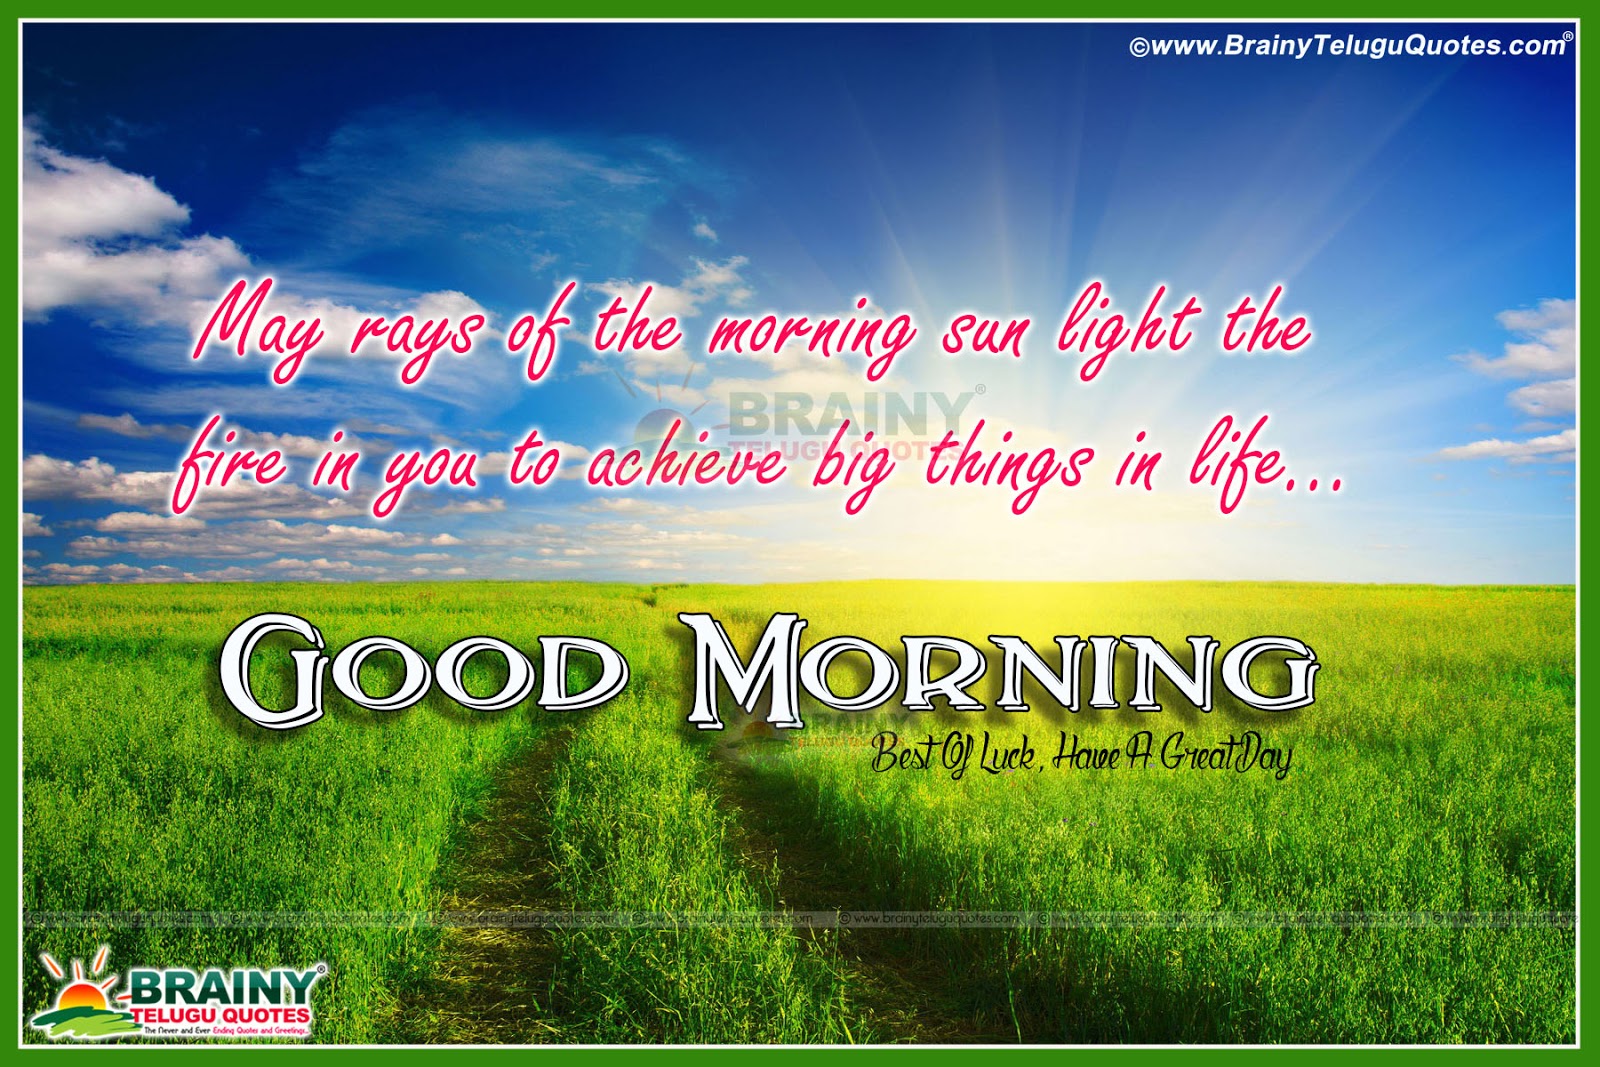 Good Morning Wishes And Quotations Online, Top English - Good Morning Best Comments , HD Wallpaper & Backgrounds